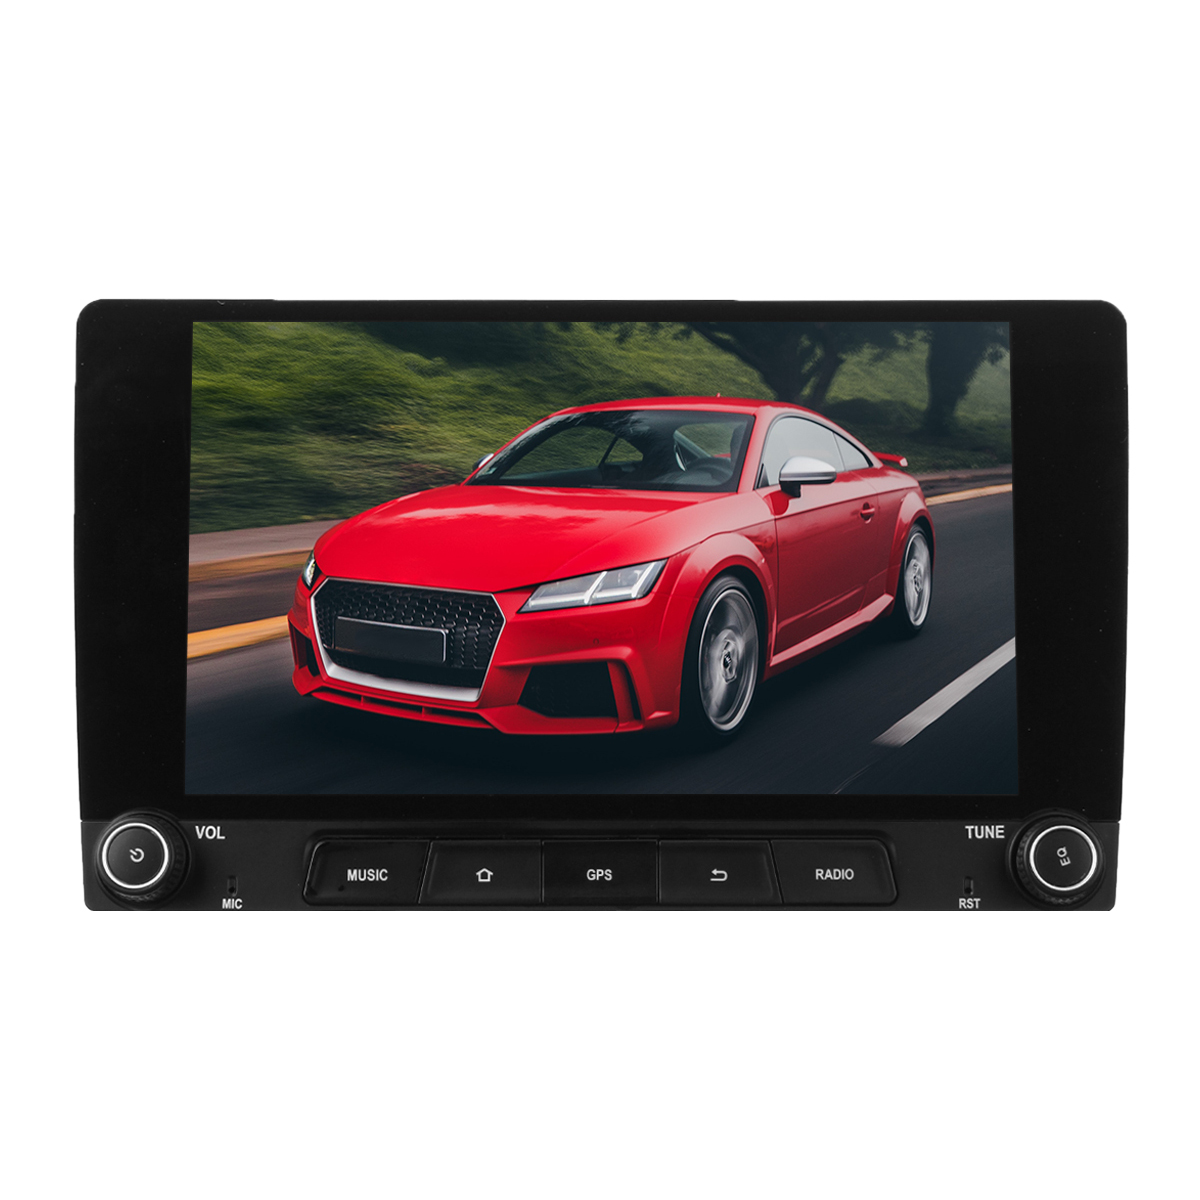 

10.1 Inch 2DIN for Android 8.1 Car Stereo Radio MP5 Player Quad Core 1+16G GPS WIFI FM with Dual Knob Support DVR Rear Camera